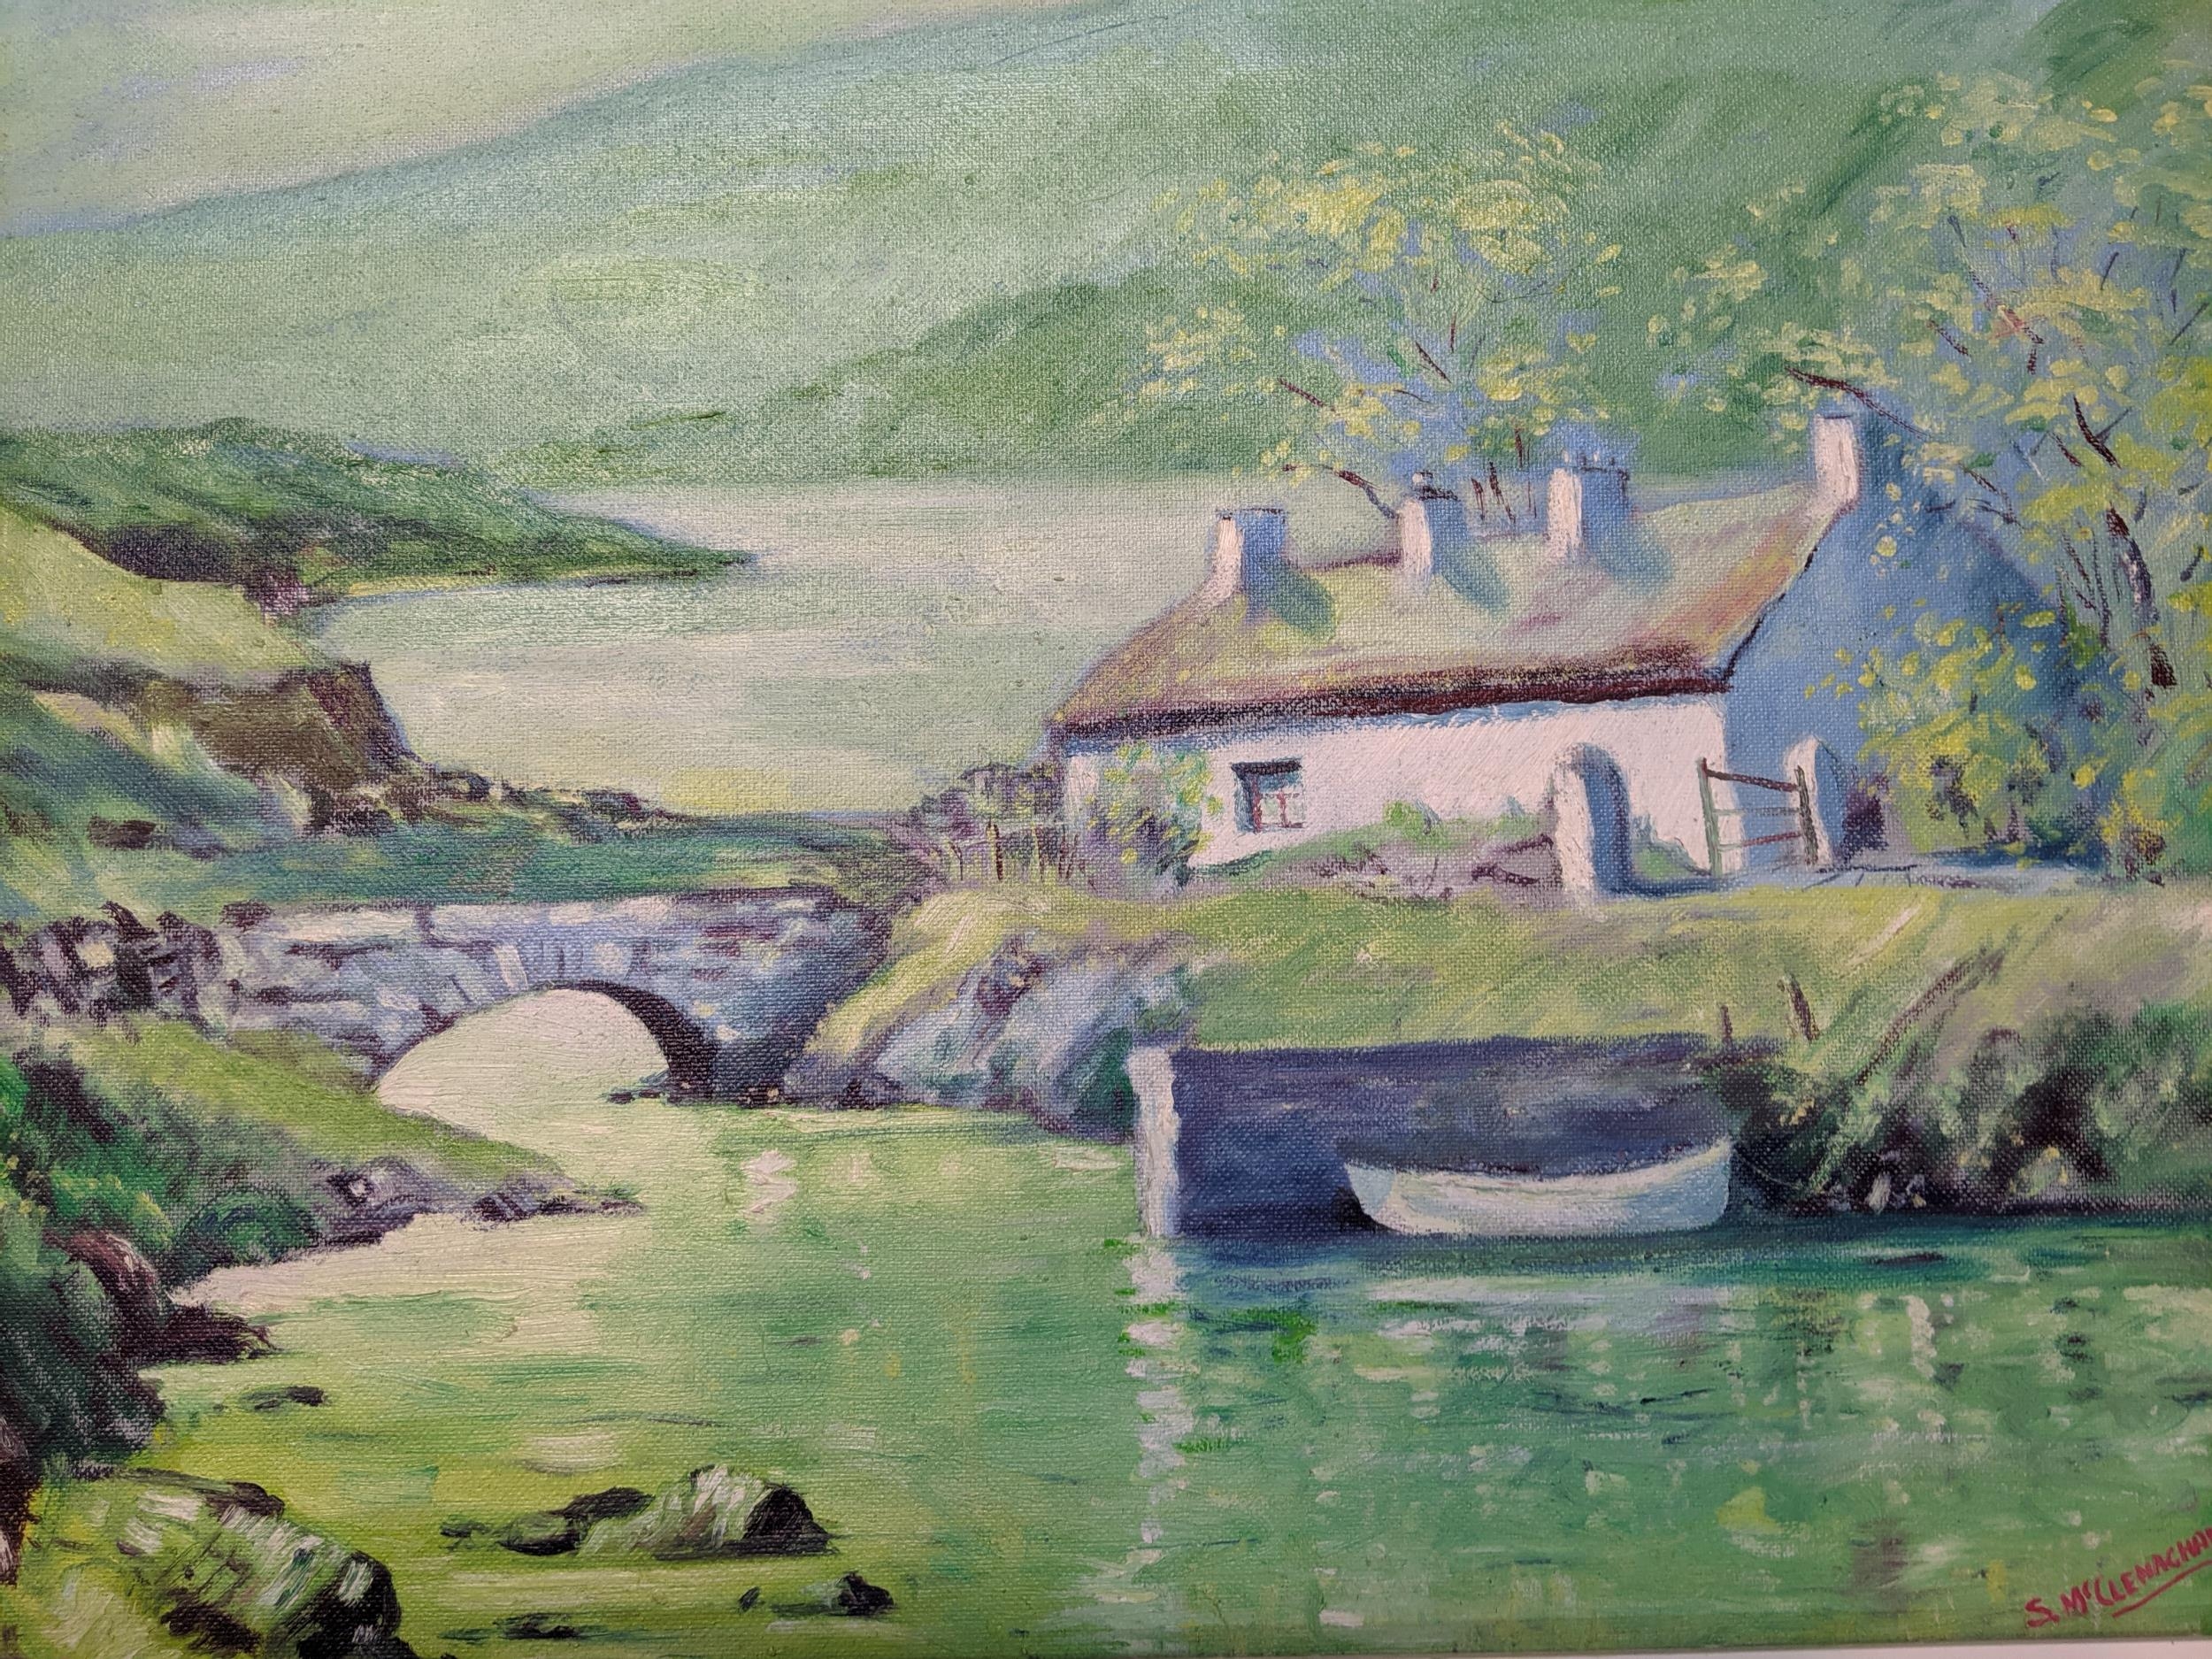 A group of Irish oil paintings and prints to include S McClemaghan - Achill Island circa 1970 a - Image 3 of 7